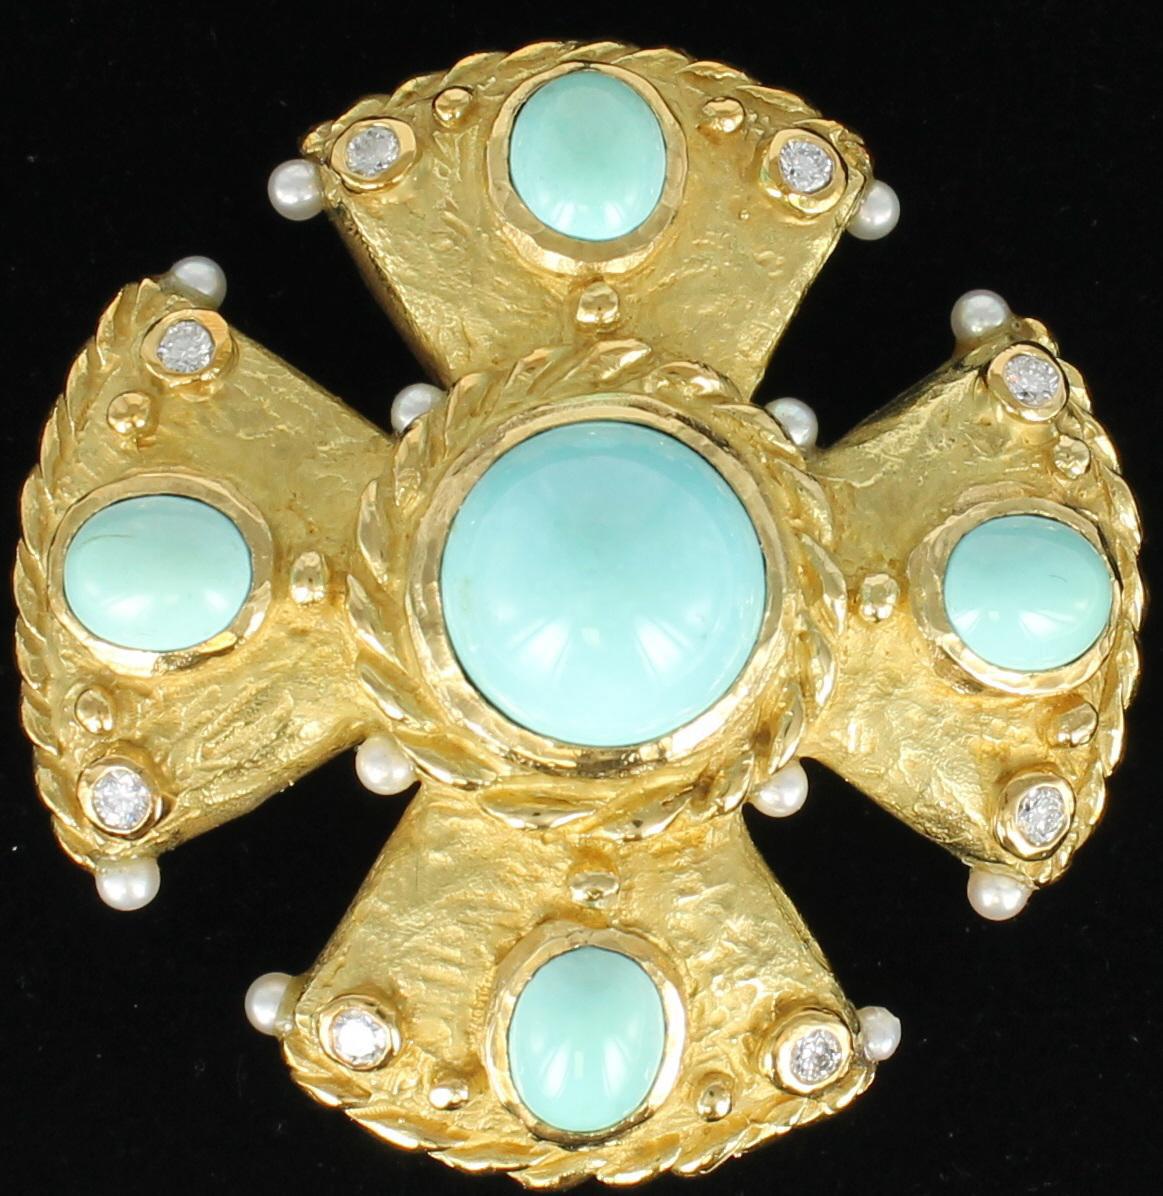 This Katy Briscoe Turquoise Maltese Cross Design Brooch-Pin with Diamonds and Pearls is beautifully handmade in 18 karat yellow gold. The design is accented by .40 carats total weight of diamonds and 12 pearls. This is another example of the